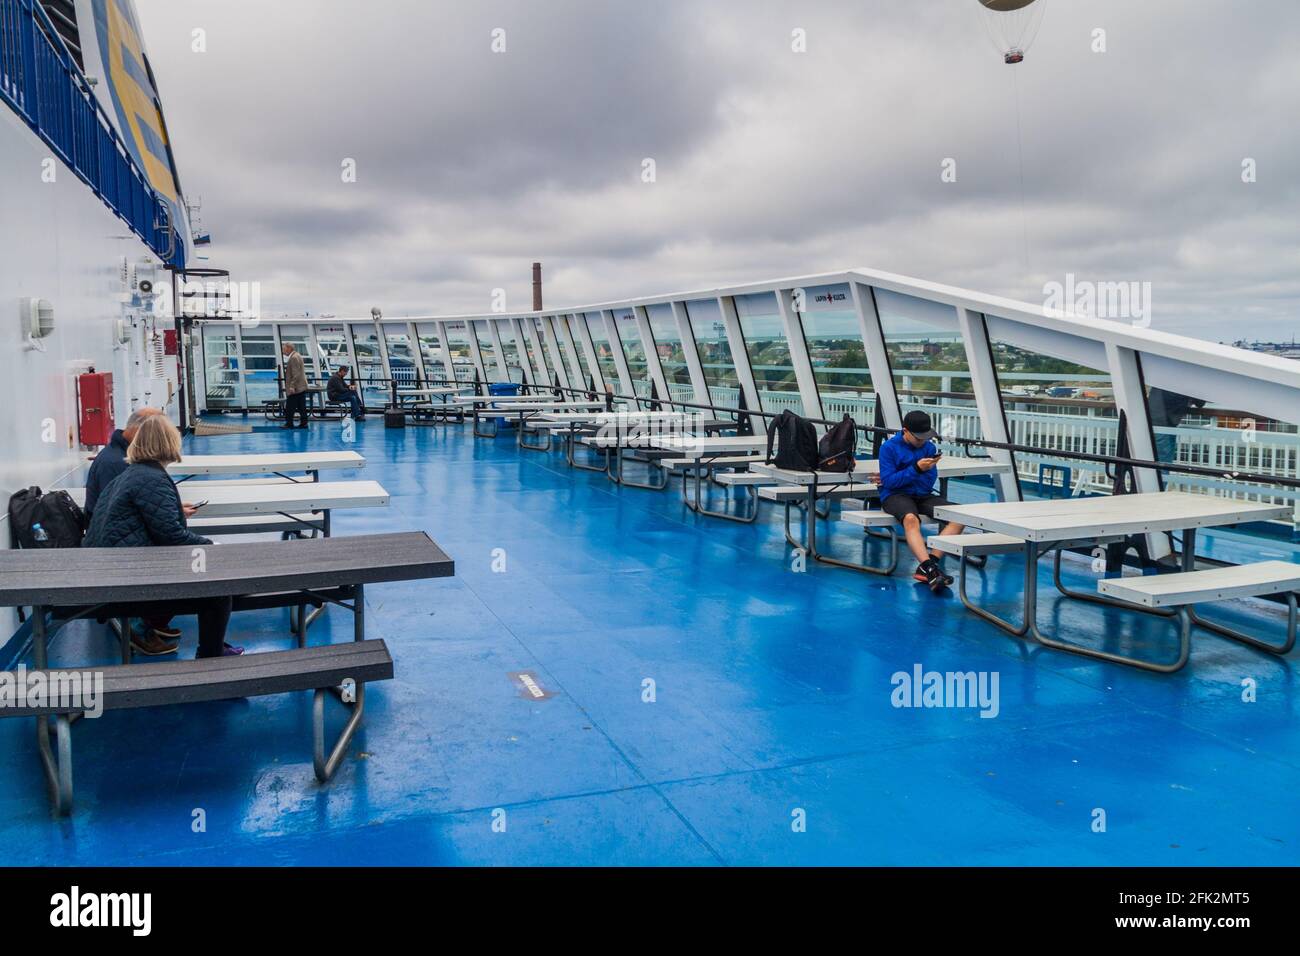 TALLINN, ESTONIA - AUGUST 24, 2016: Deck of MS Finlandia cruiseferry owned and operated by the Finnish ferry operator Eckero Line in the harbor of Tal Stock Photo